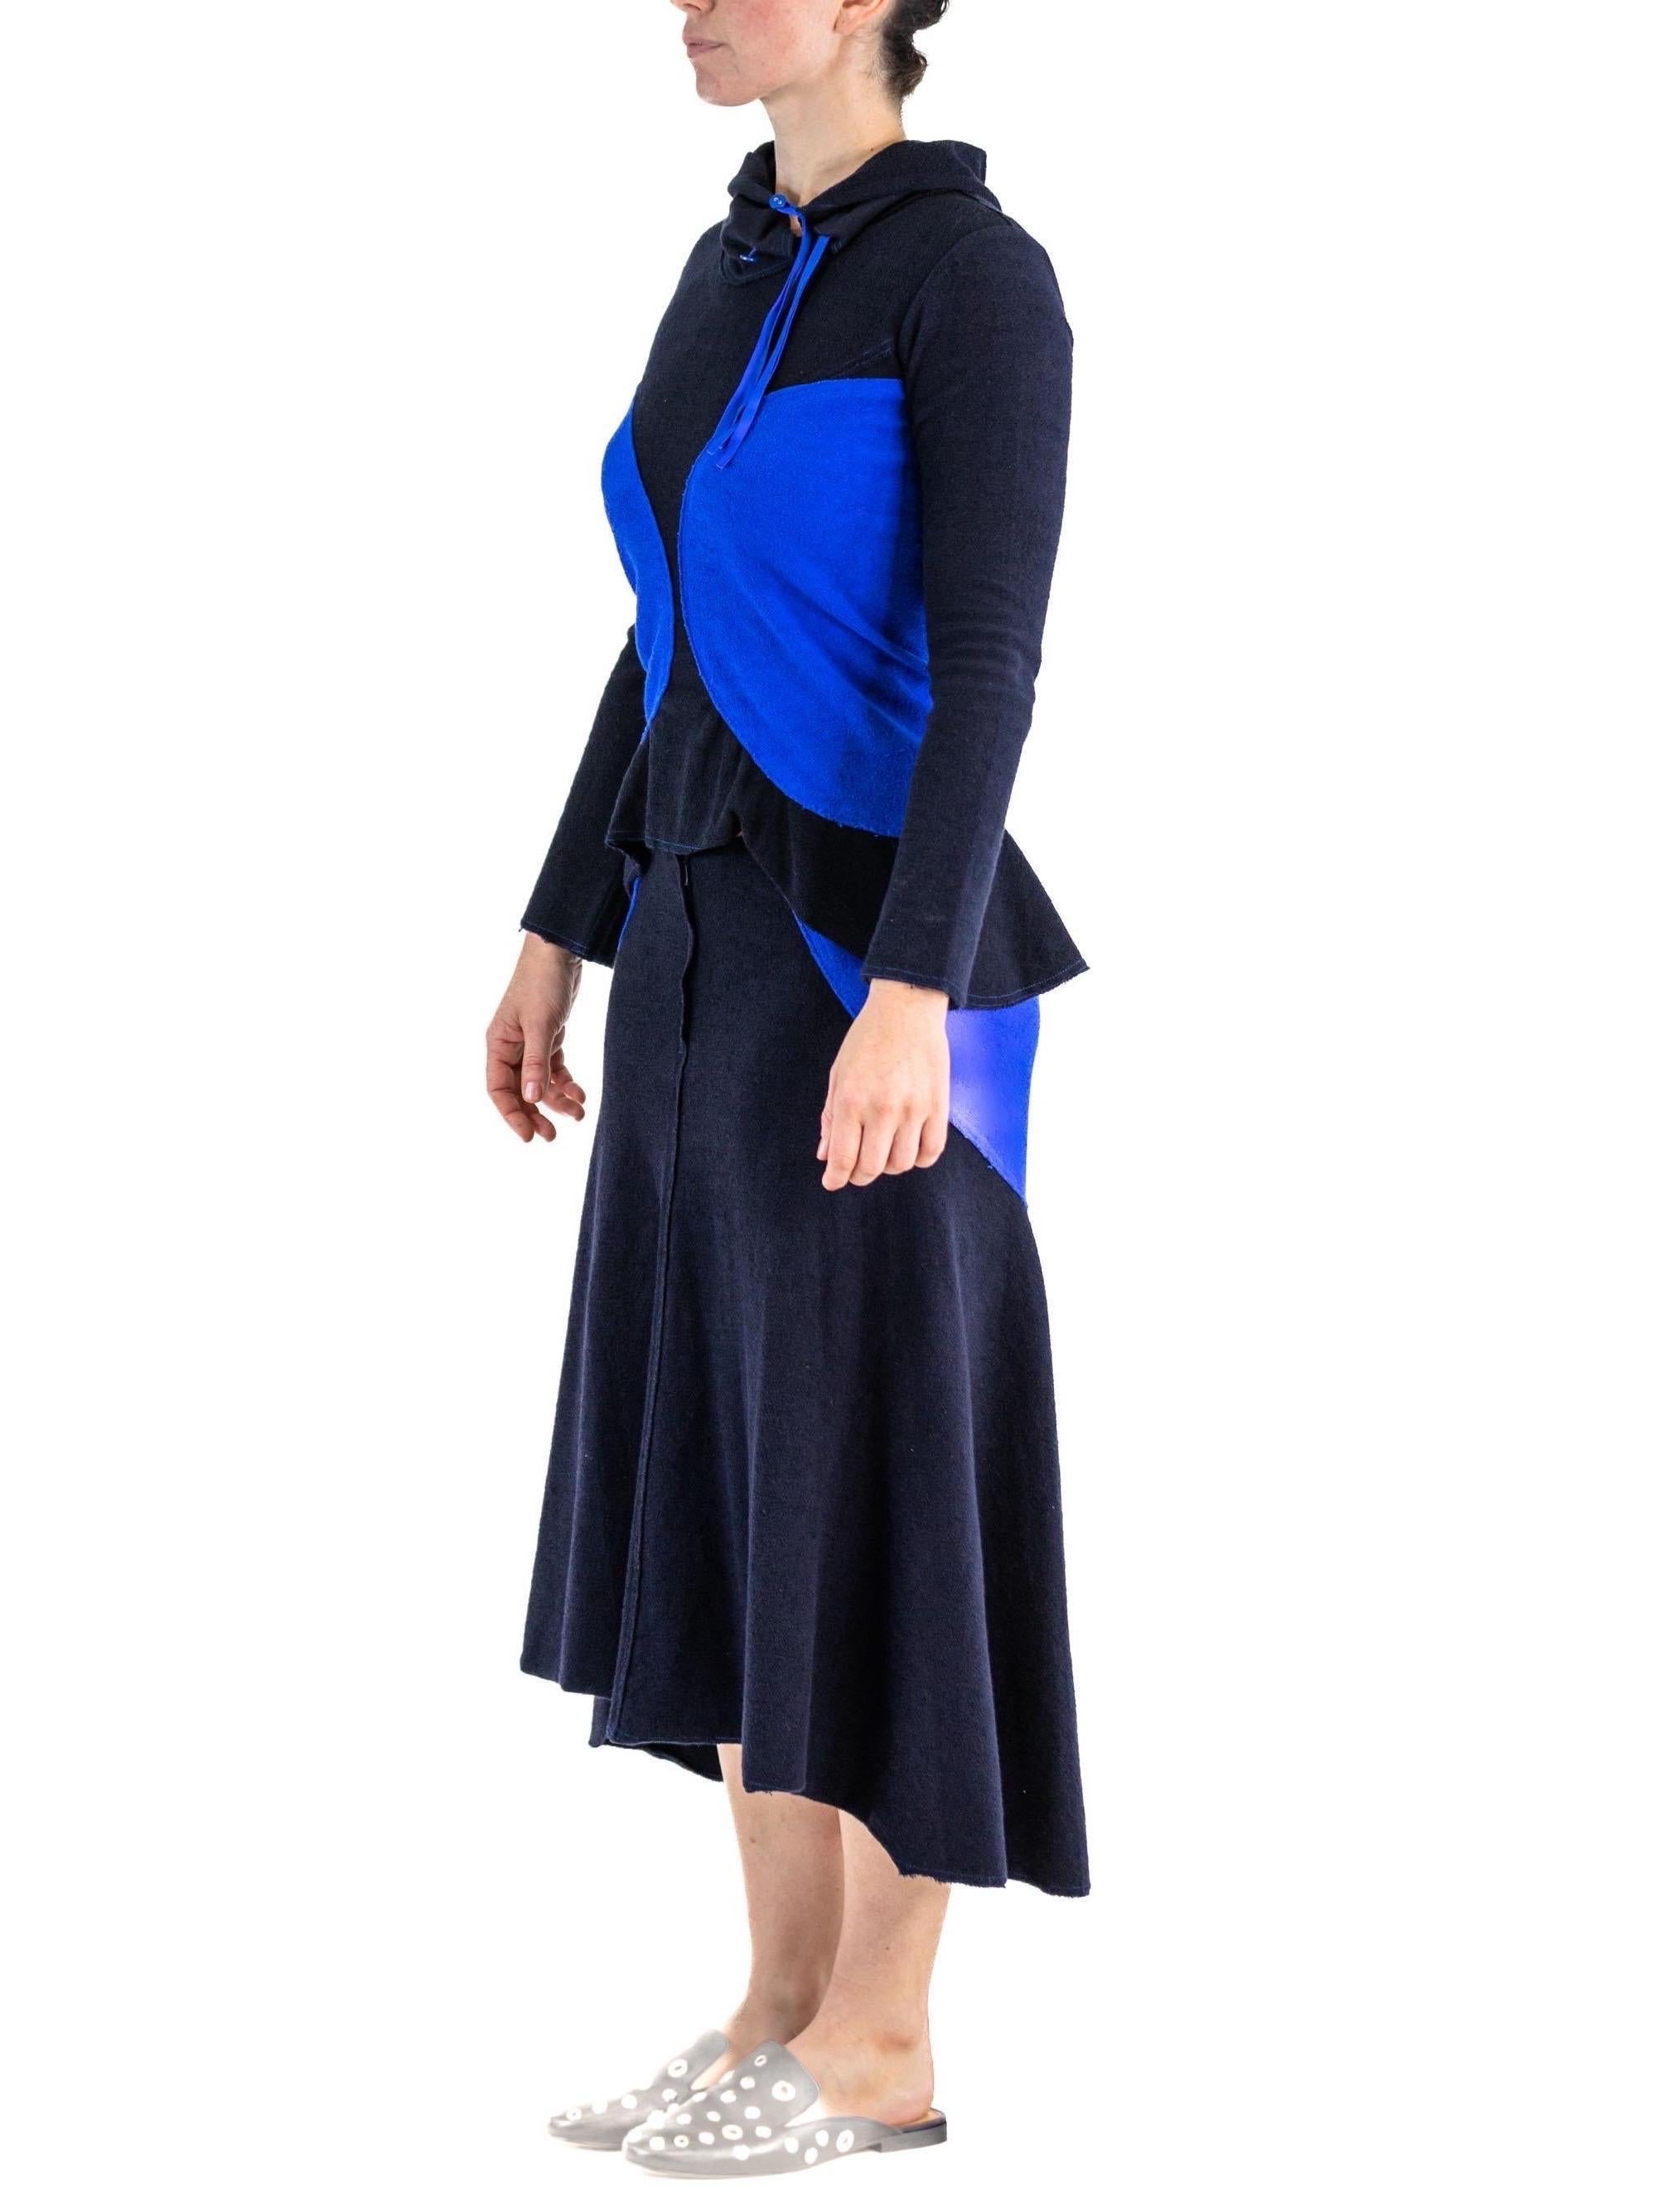 1990S ISSEY MIYAKE Cobalt Blue & Navy Cotton Terry  Colorblock Top Skirt Ensemb In Excellent Condition For Sale In New York, NY